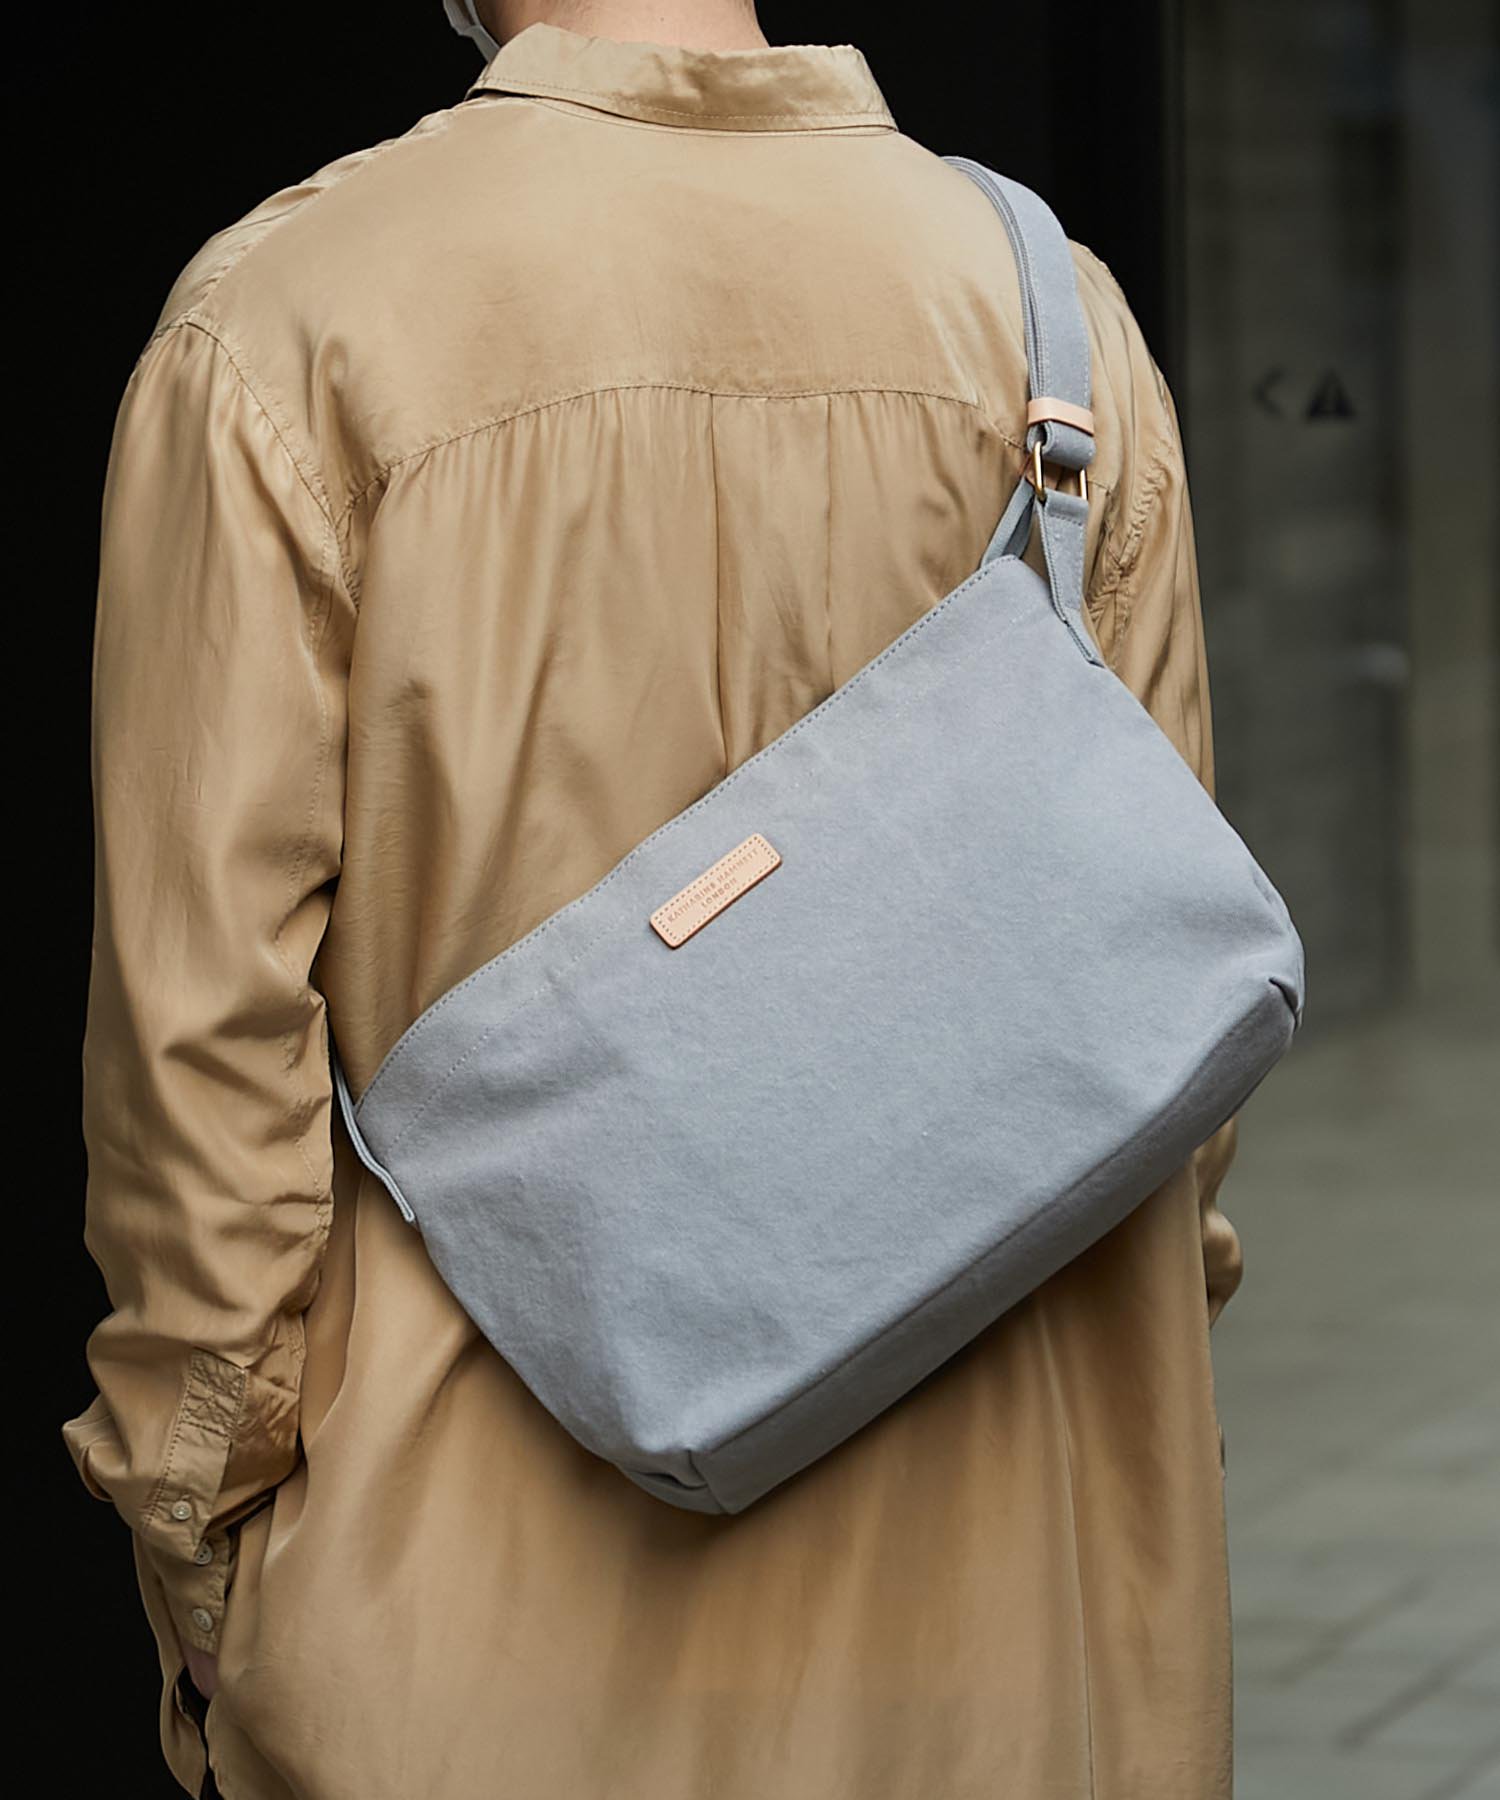 <img class='new_mark_img1' src='https://img.shop-pro.jp/img/new/icons15.gif' style='border:none;display:inline;margin:0px;padding:0px;width:auto;' />【KATHARINE HAMNETT LONDON】SHOULDER TOTE BAG（GRY）